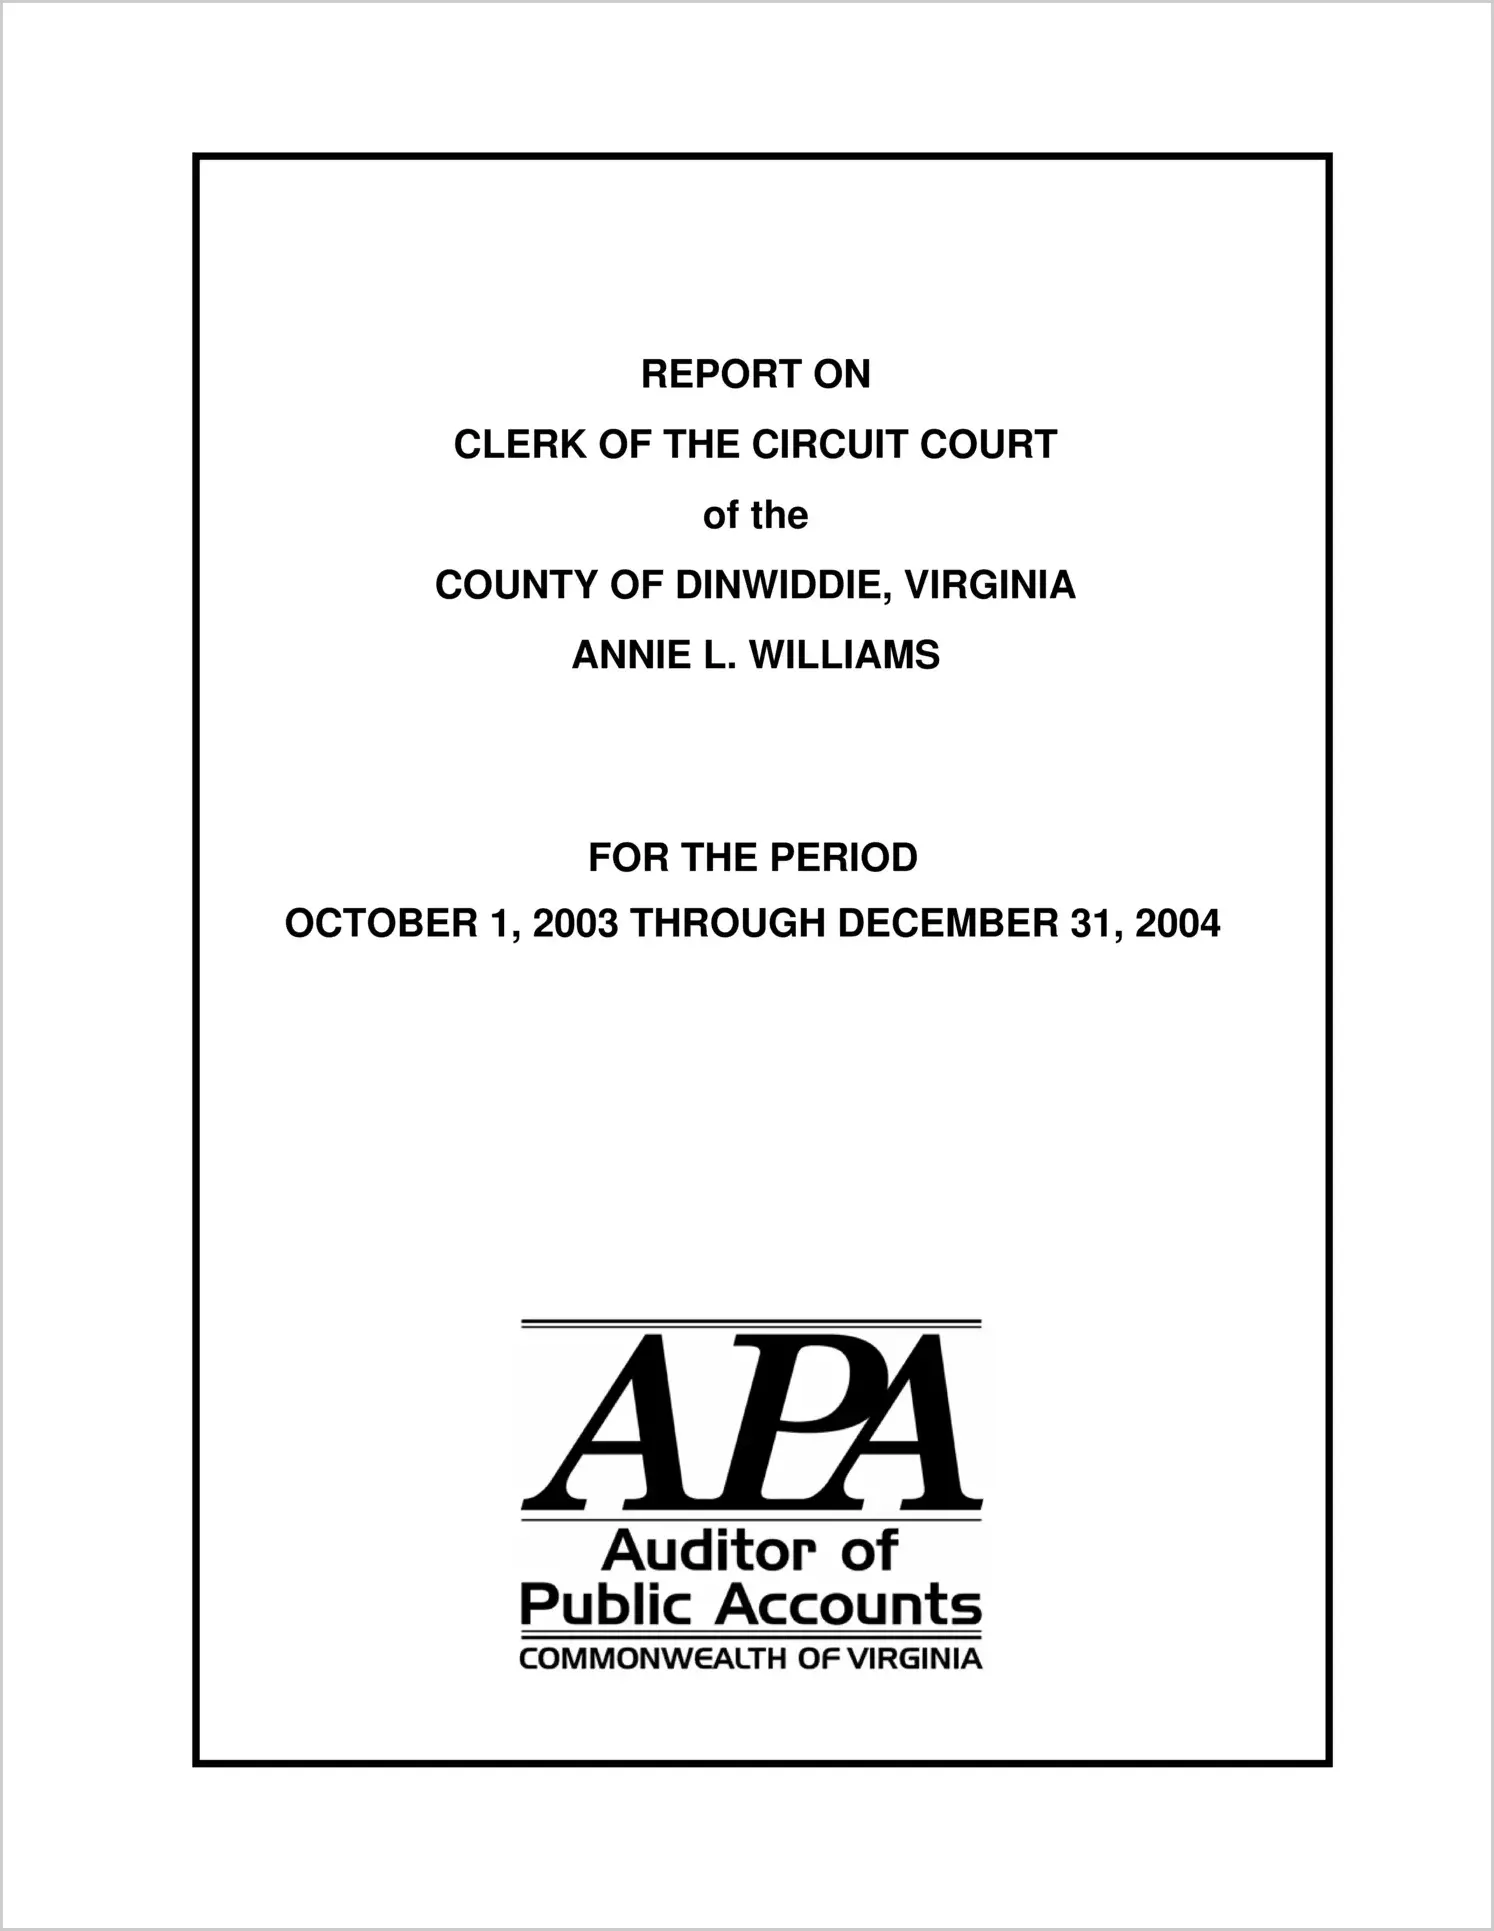 Clerk of the Circuit Court of the County of Dinwiddie for the period October 1, 2003 through December 31, 2004